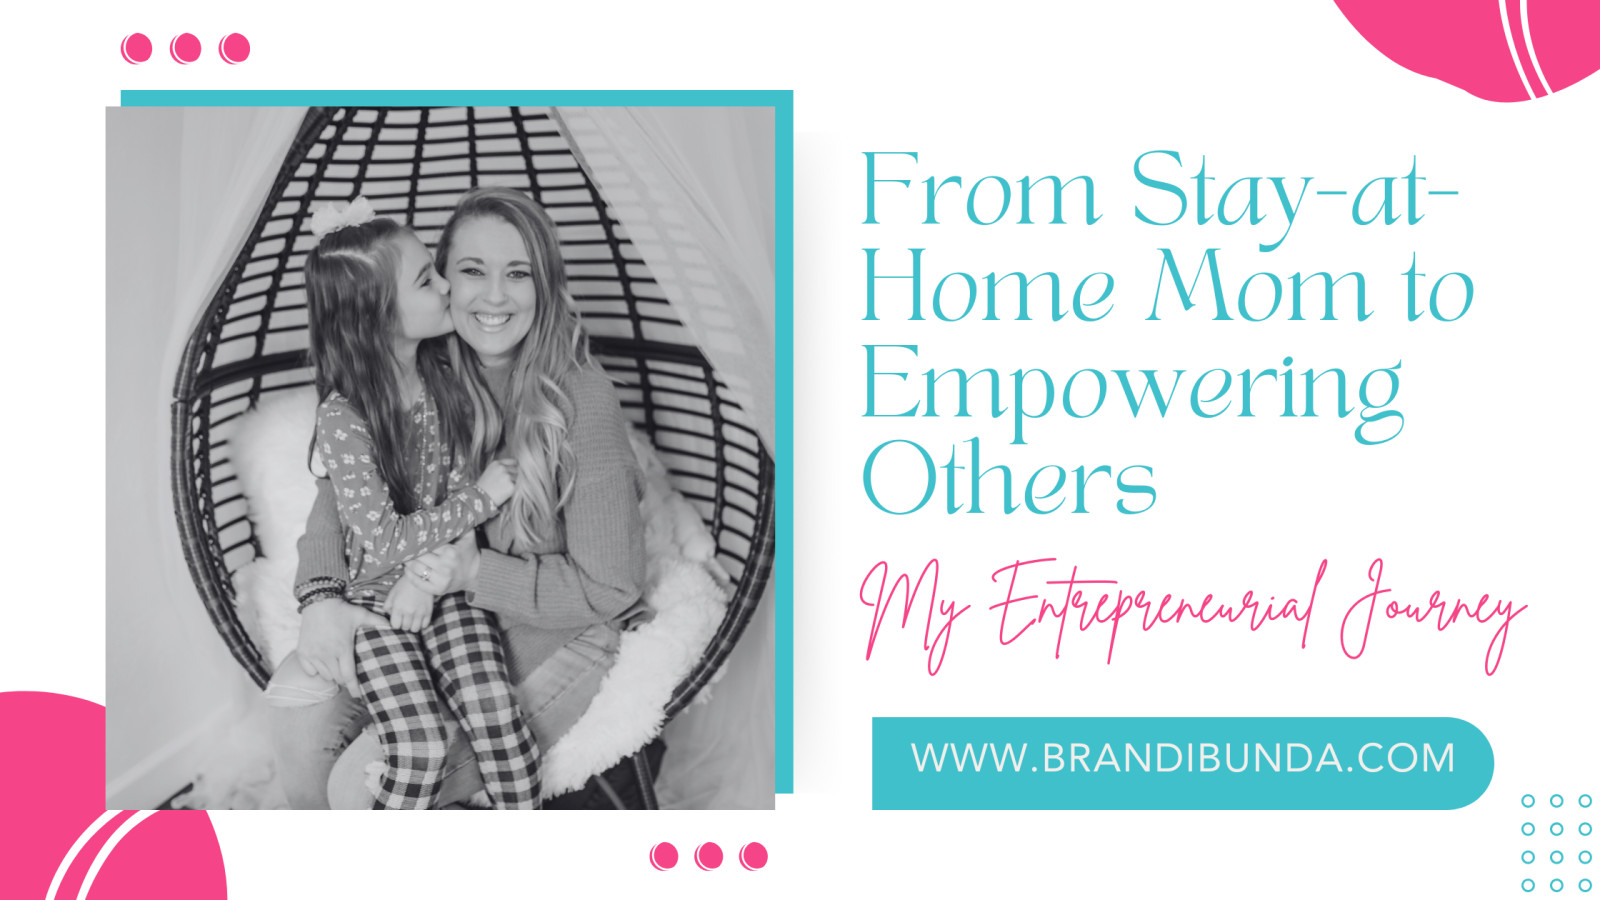 From Stay-at-Home Mom to Empowering Others